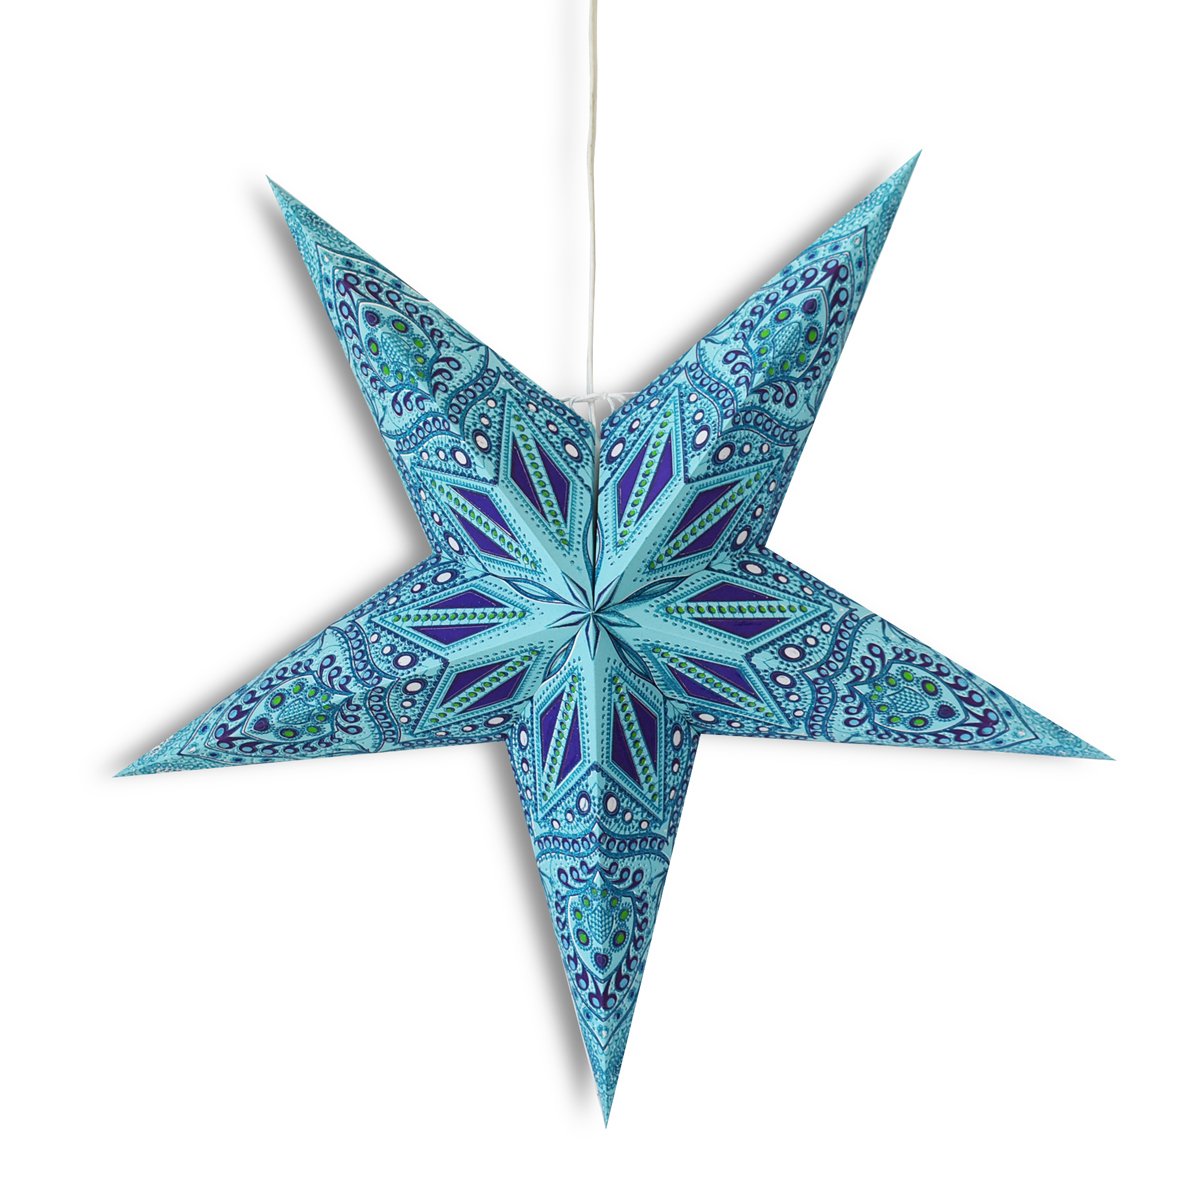 24" Turquoise Crystal Glitter Paper Star Lantern, Hanging Wedding & Party Decoration - AsianImportStore.com - B2B Wholesale Lighting and Decor